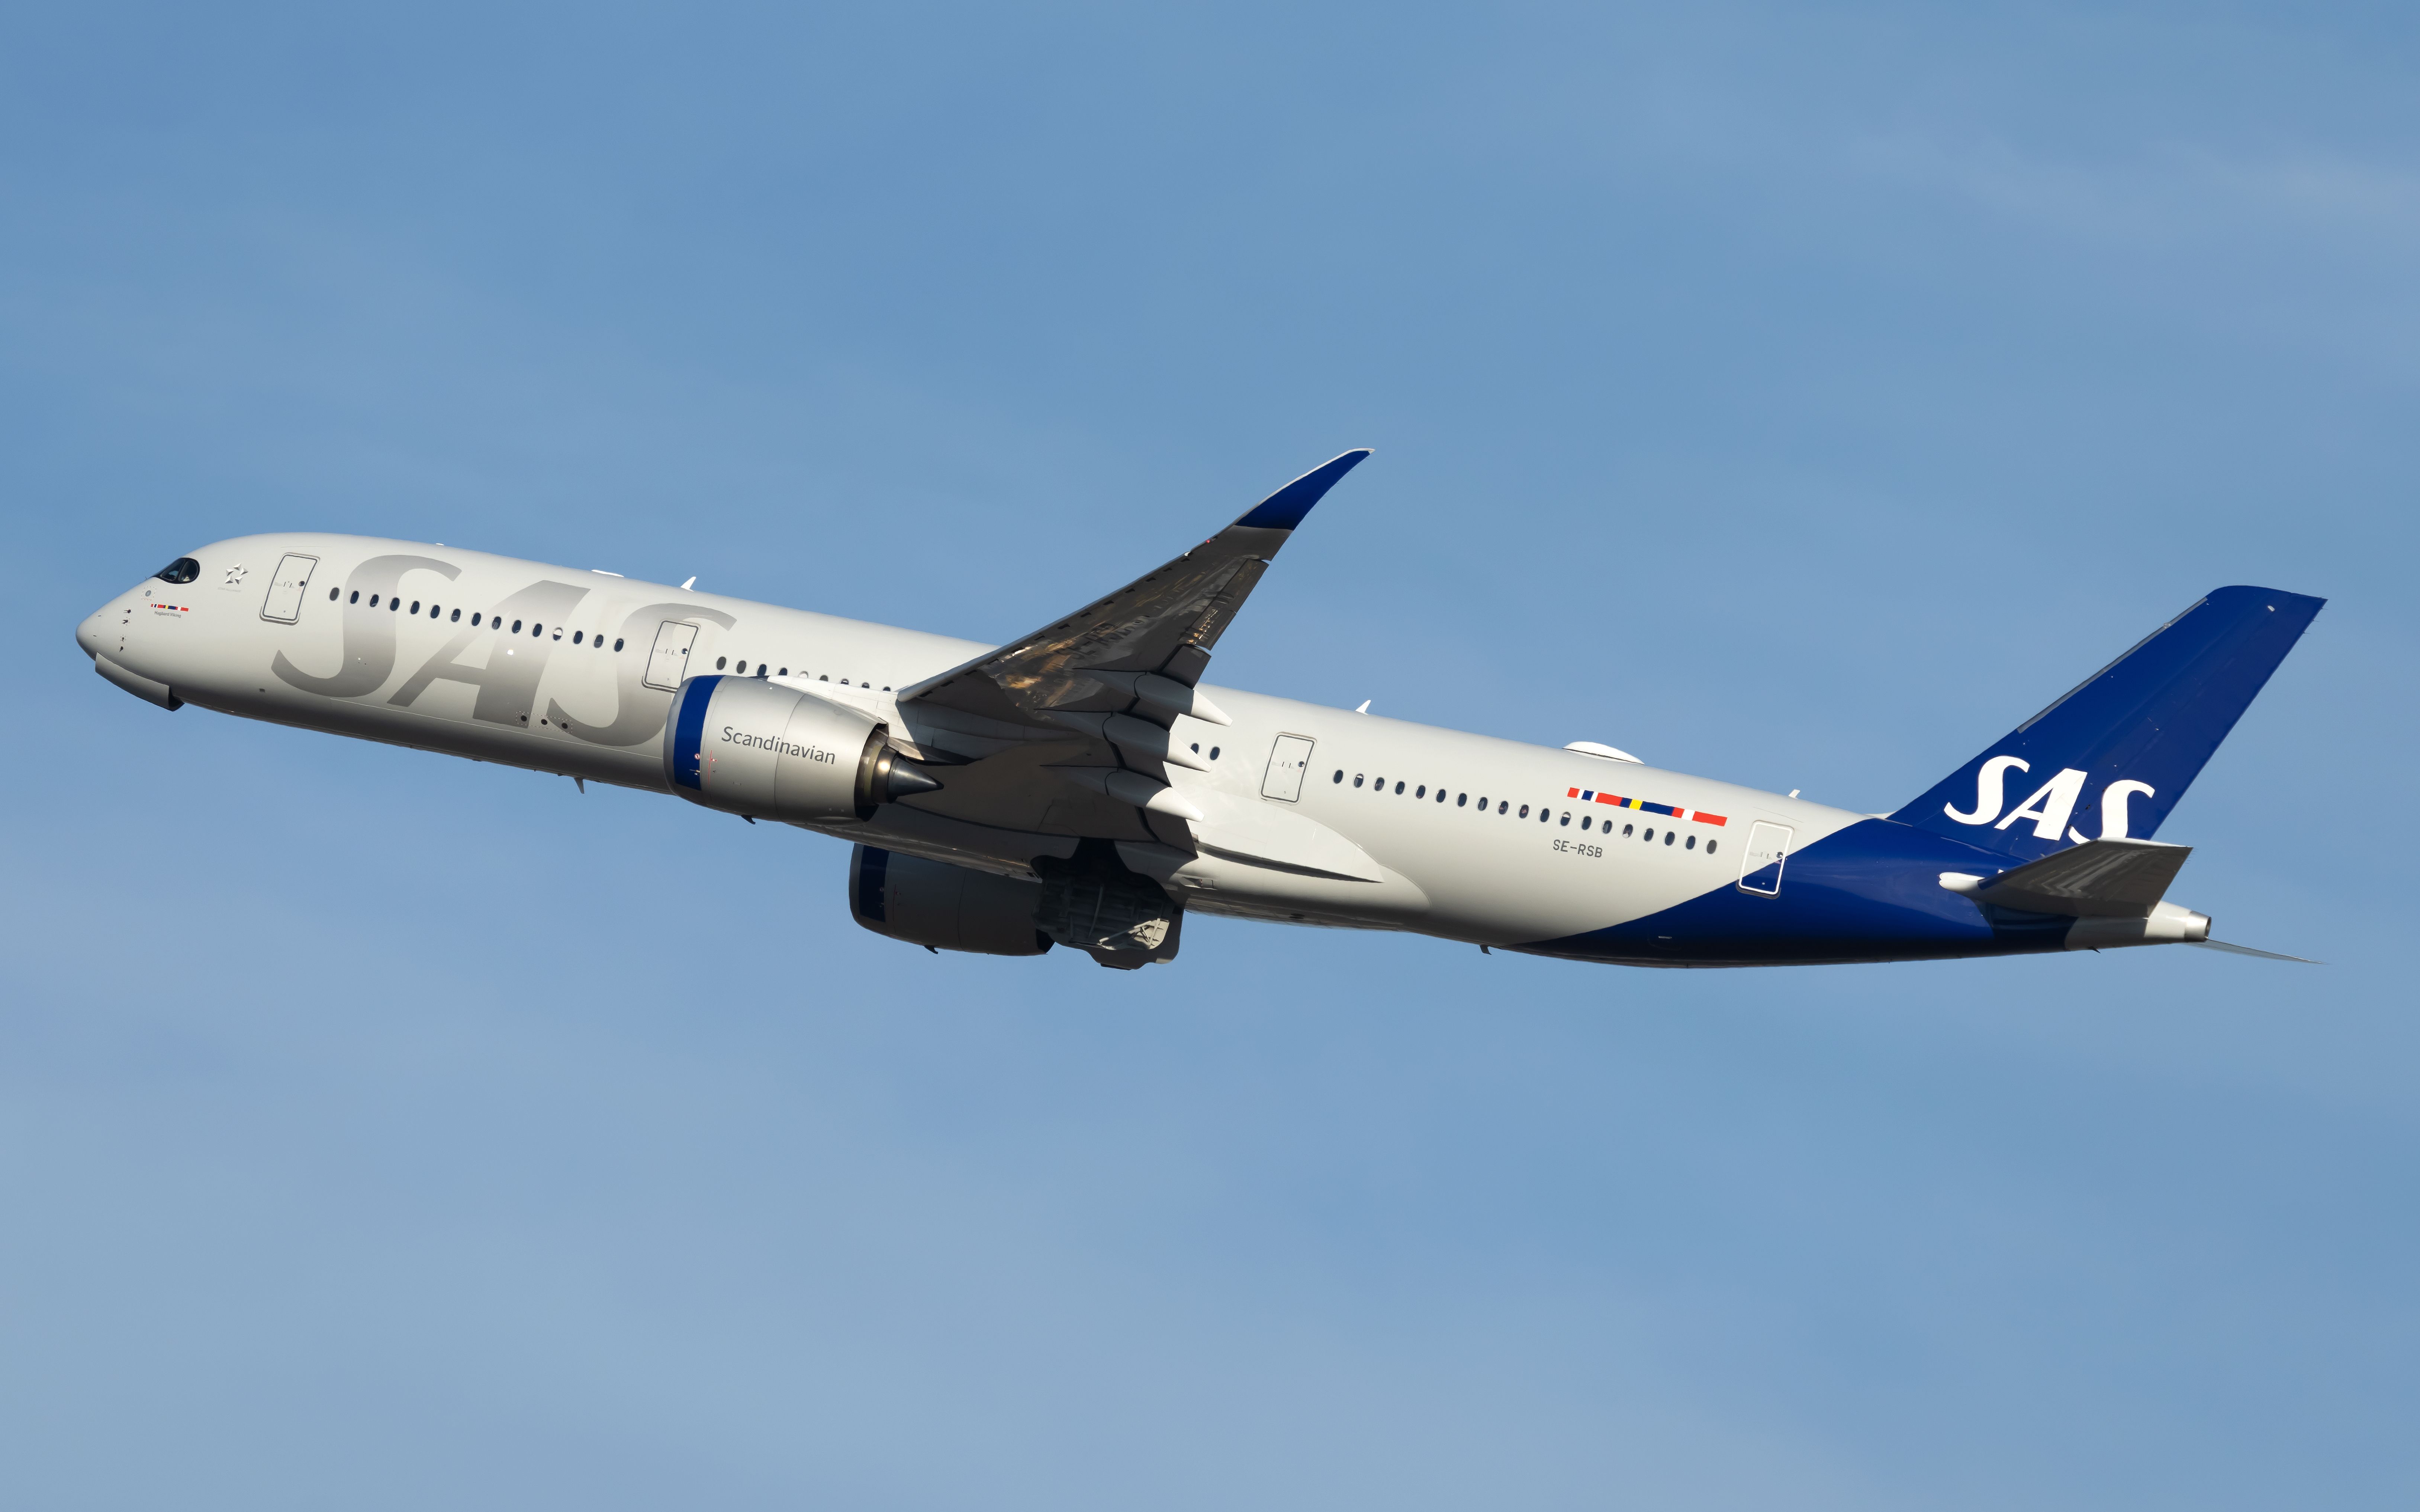 An SAS Airbus A350-900 flying in the sky.